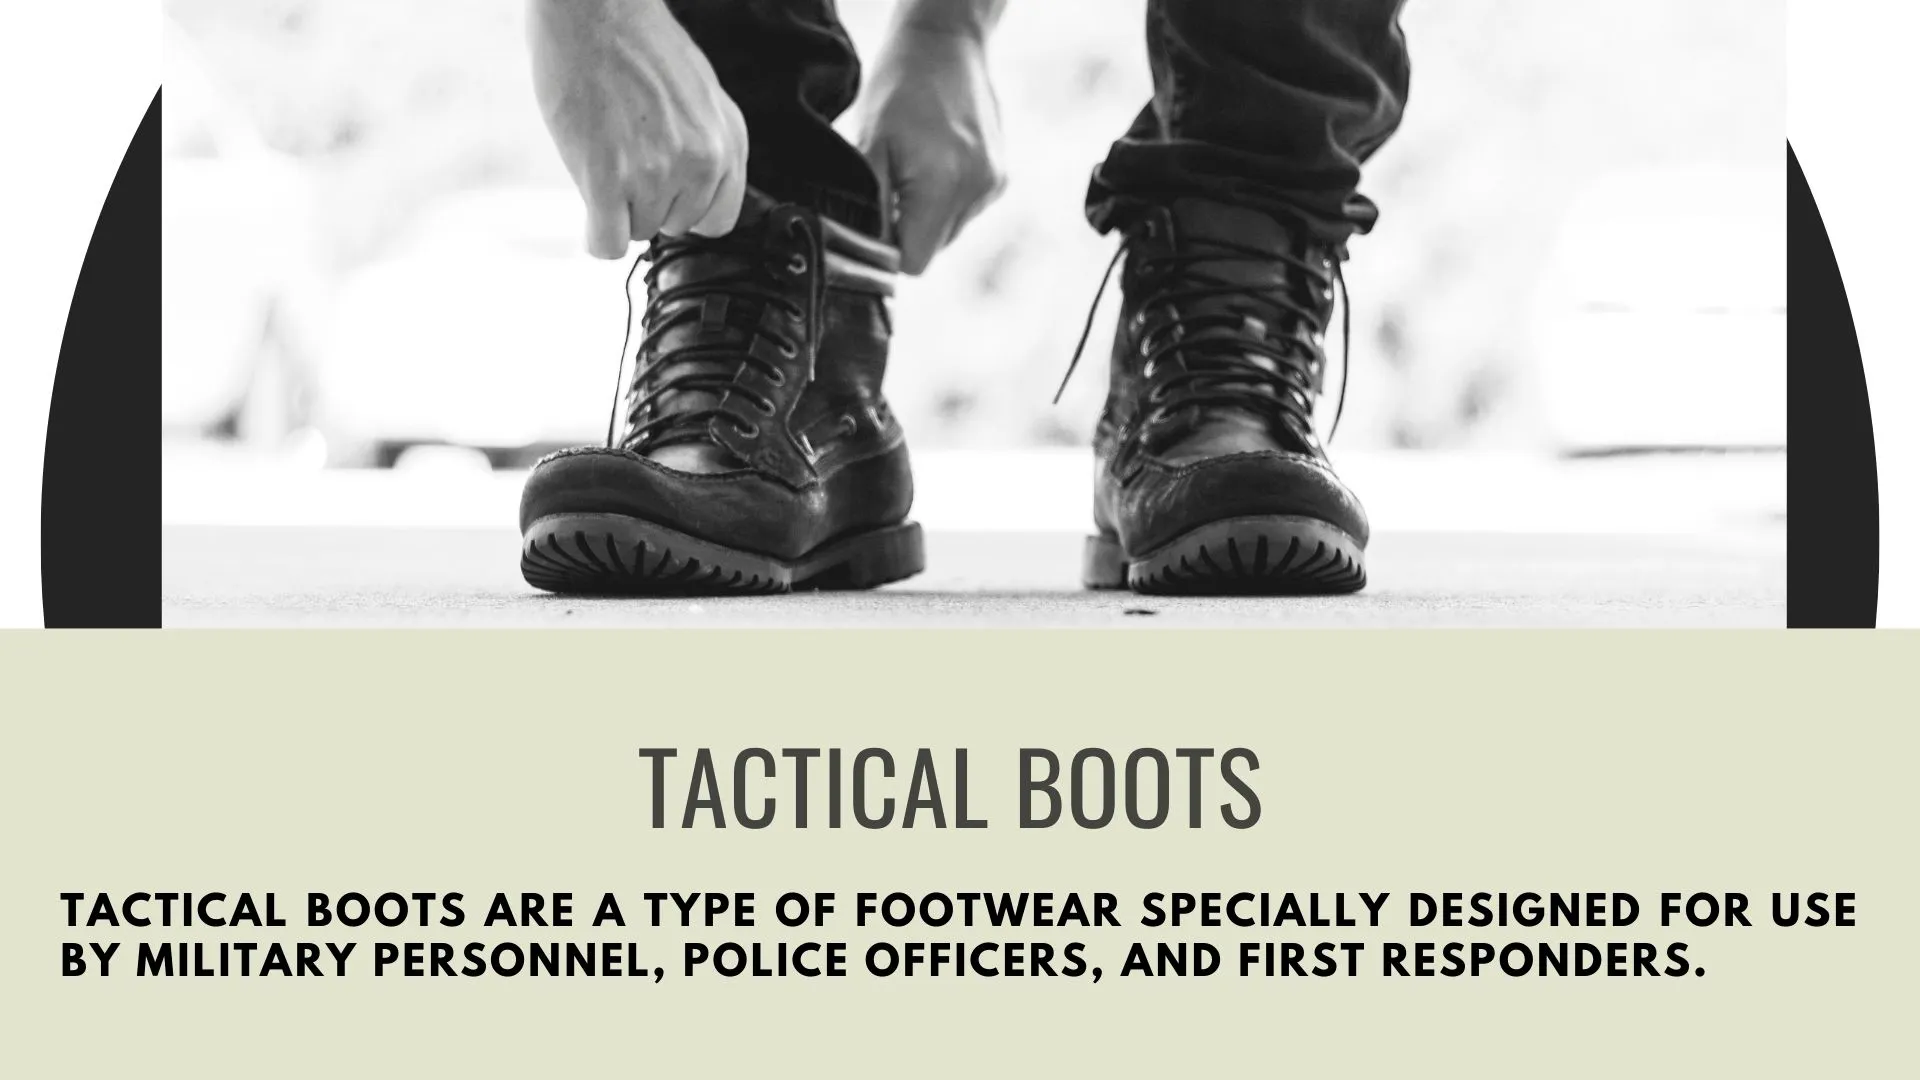 What are tactical boots?